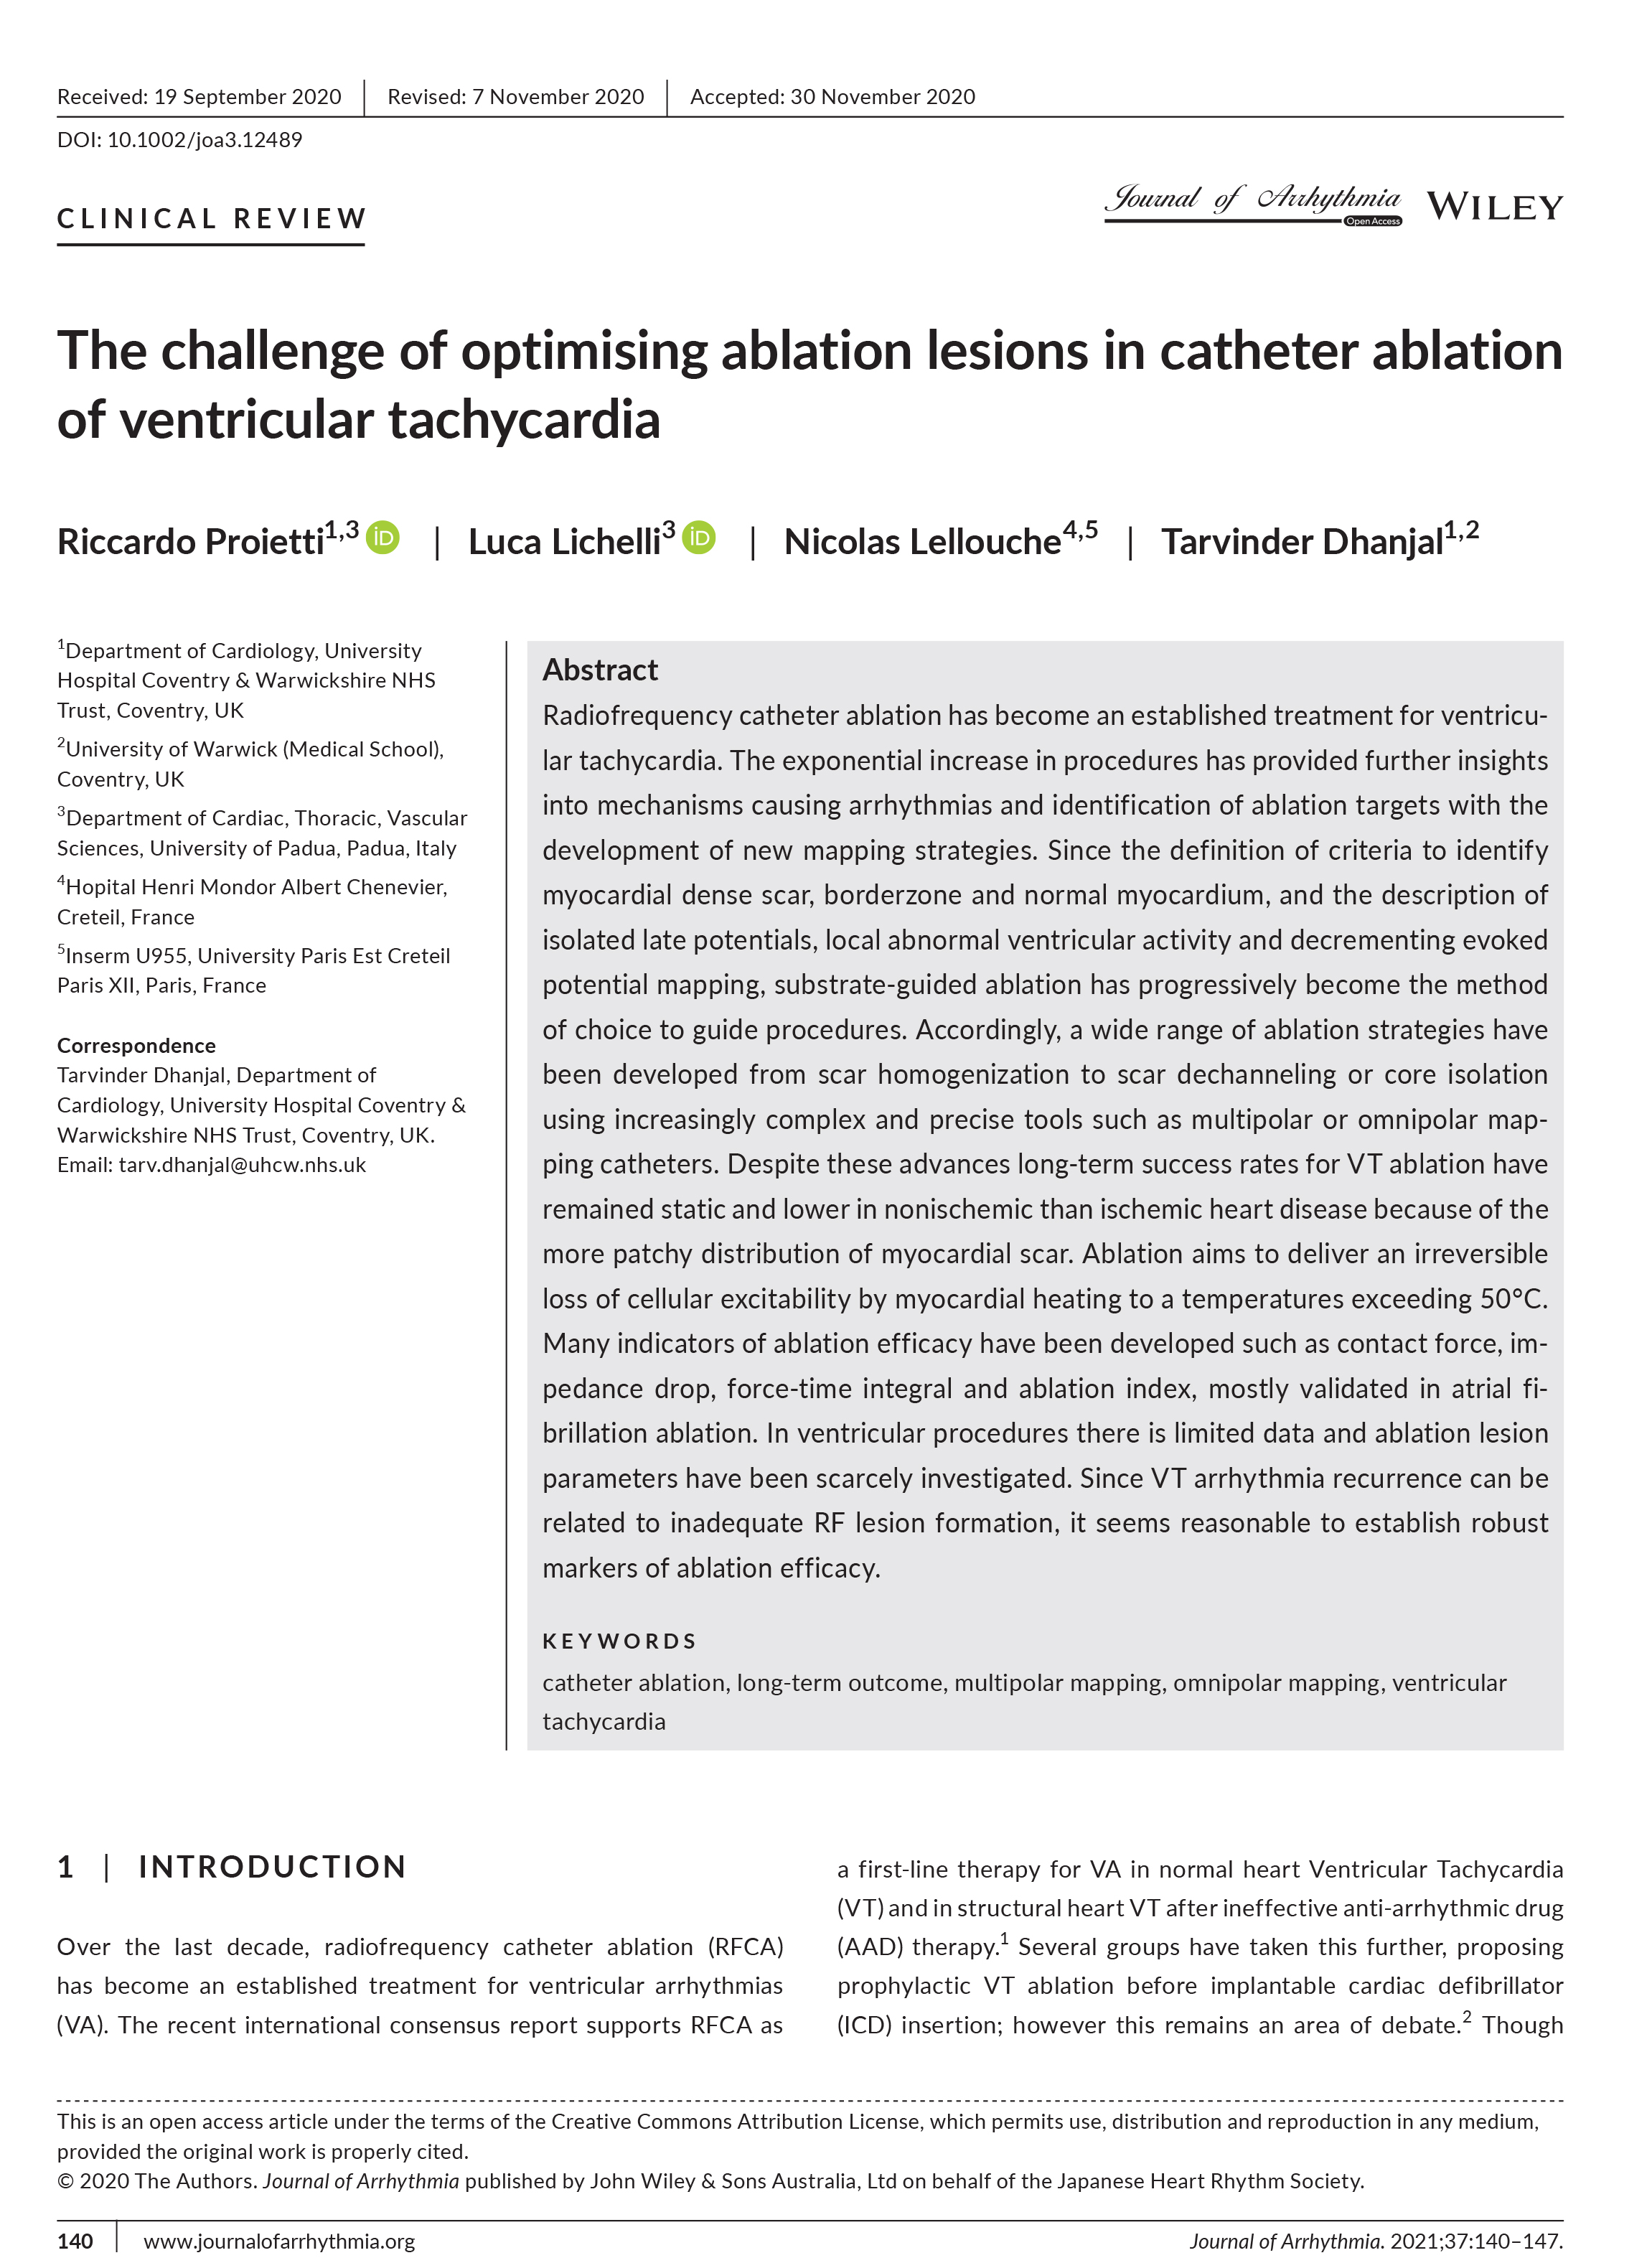 The challenge of optimising ablation lesions in catheter ablation of ventricular tachycardia